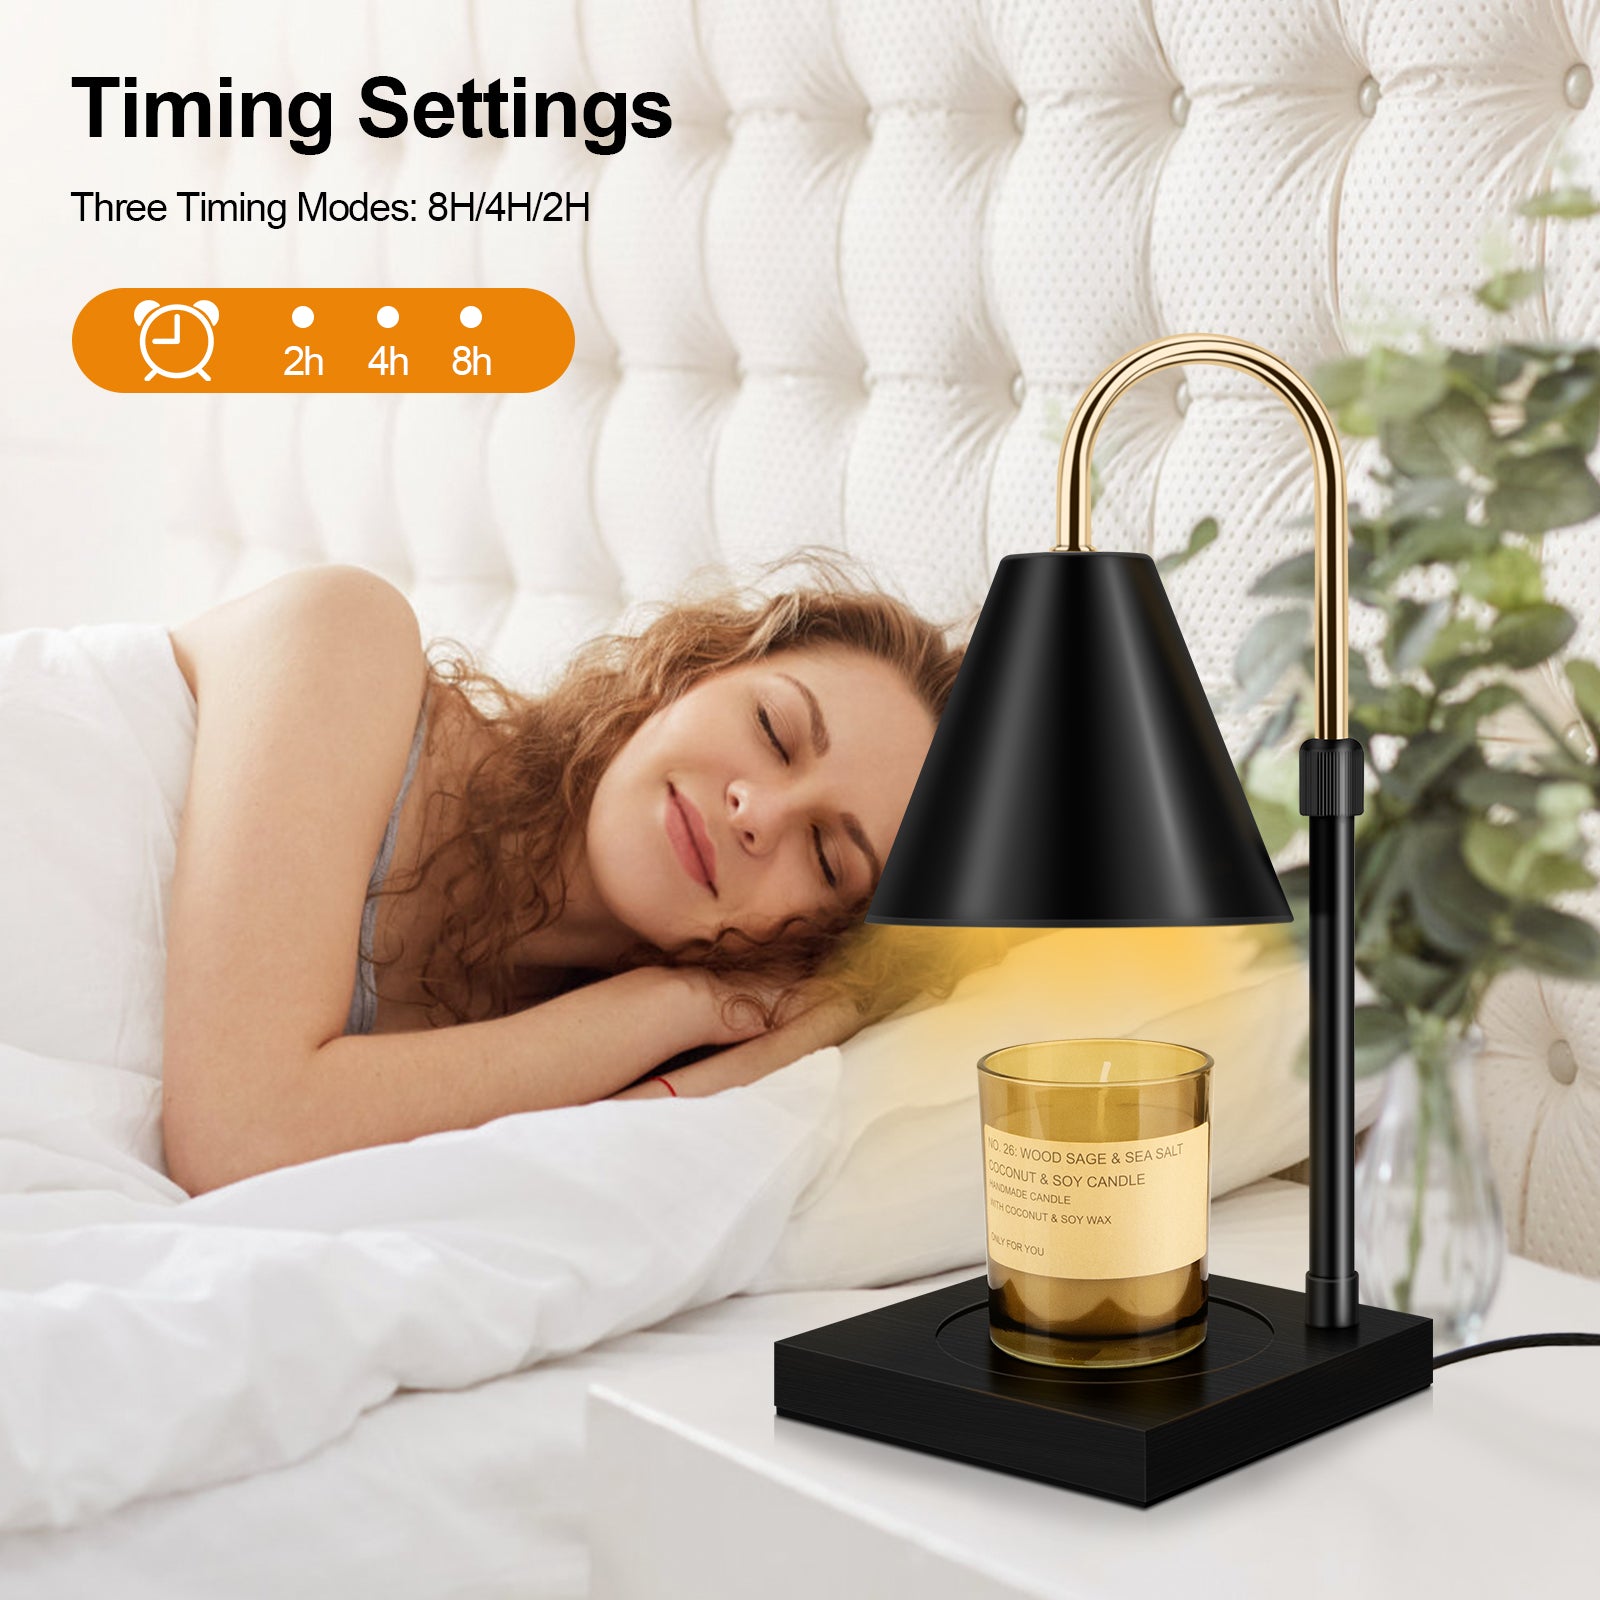 Candle Warmer, Candle Warmer Lamp With Timer Dimmable And Adjustable Height Candle Lamp Warmer Compatible With Jar Candles For Home Decor Electric Wax Melter Warmer, Wooden Base Black